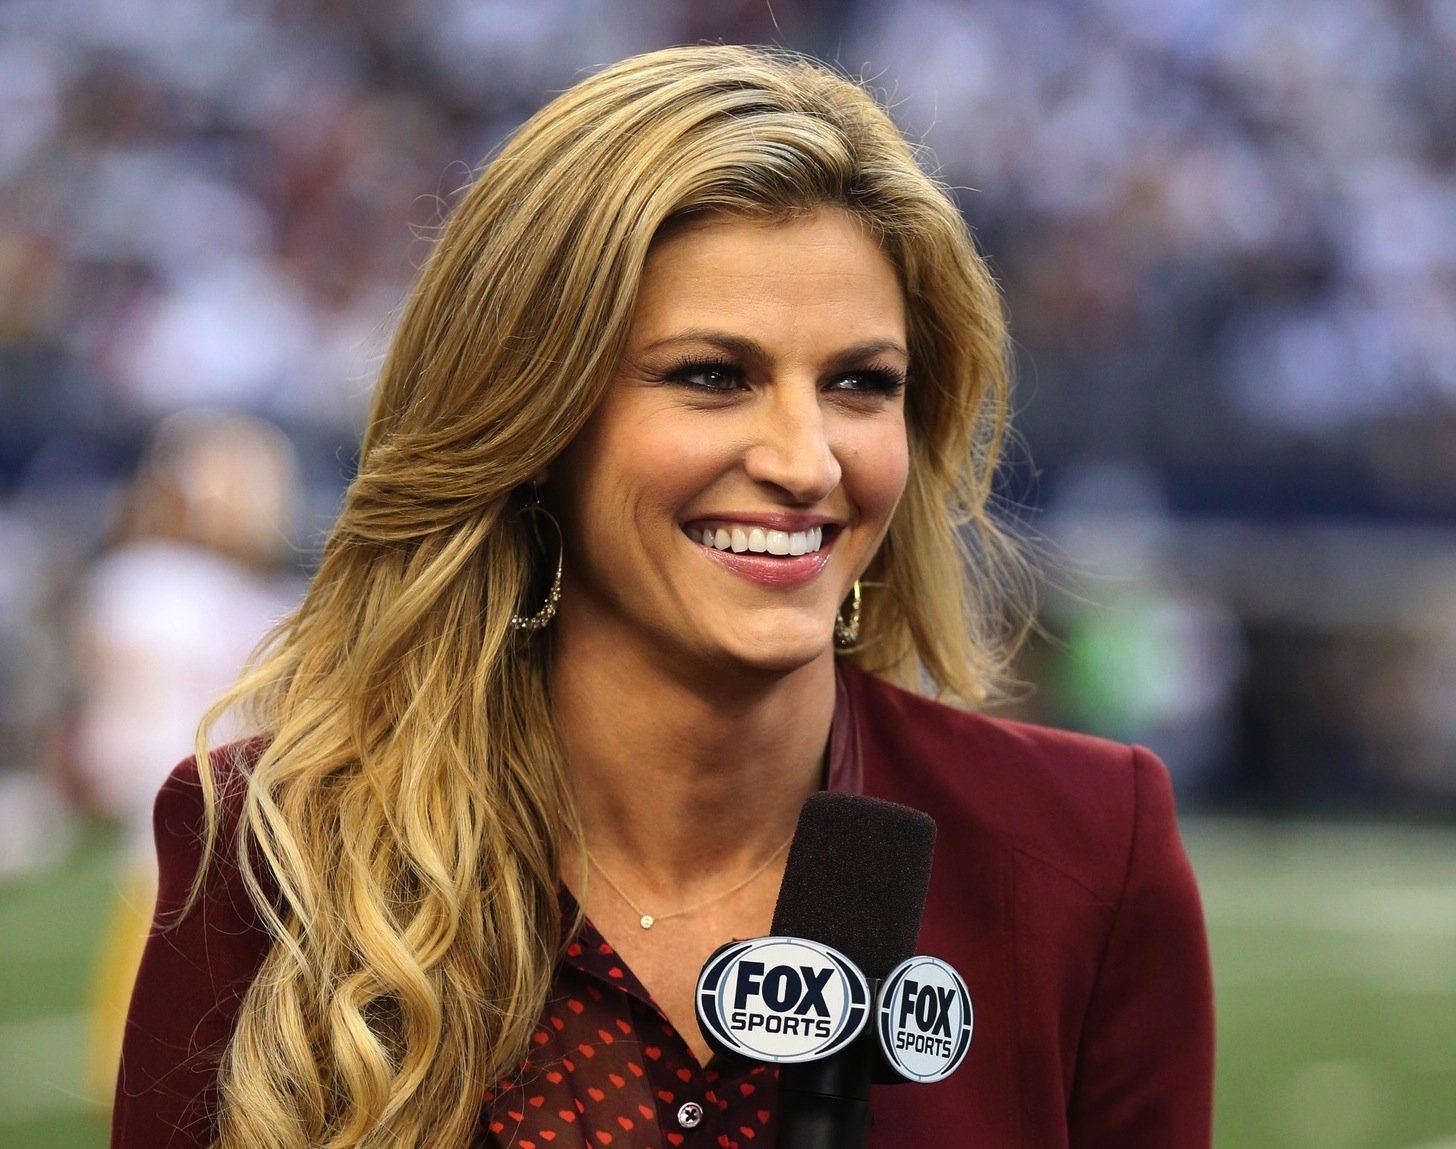 Erin naked andrews of pictures Erin Andrews